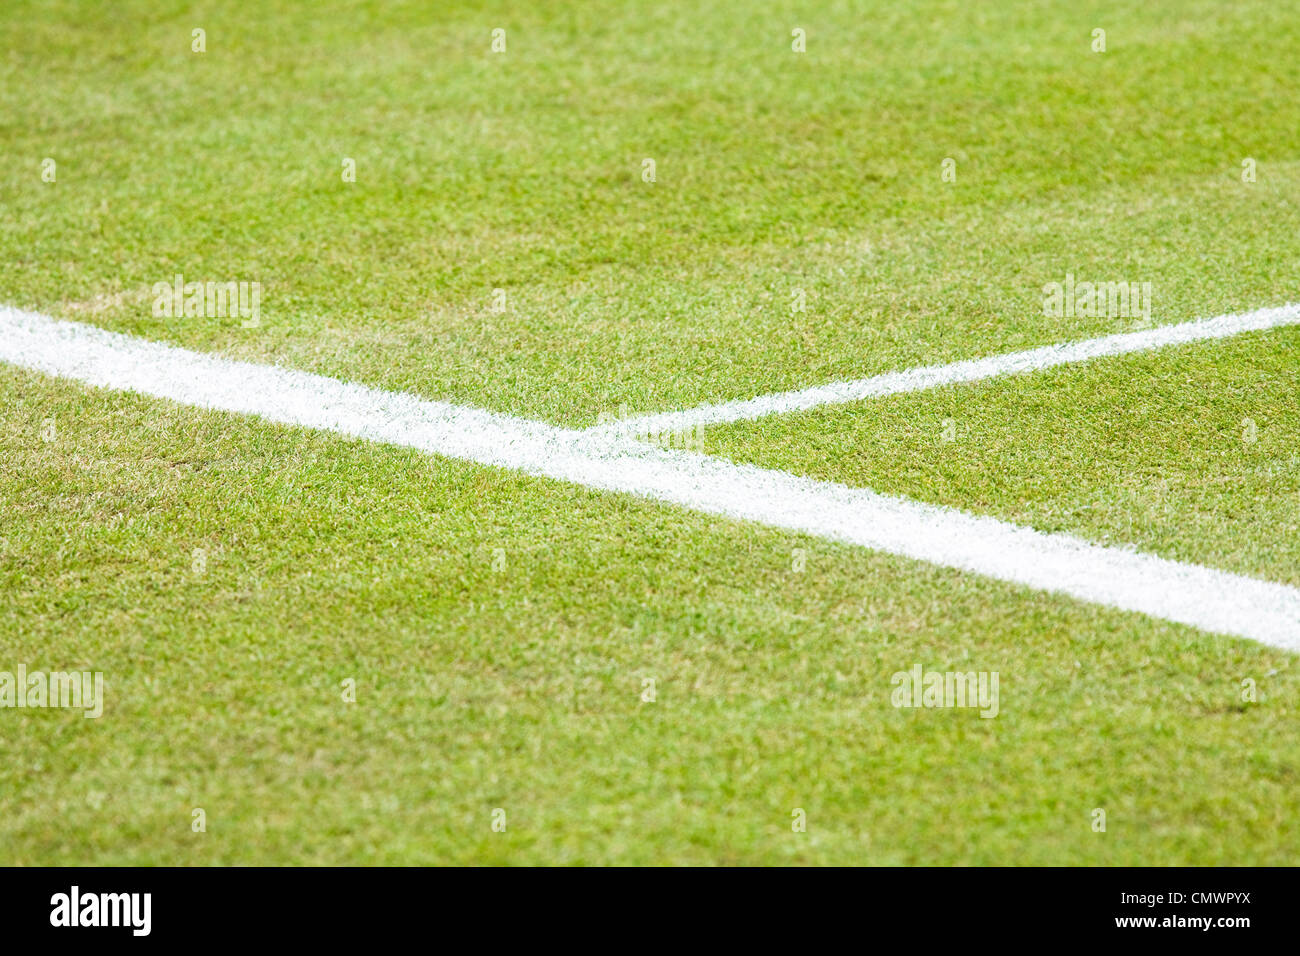 Closeup of the service line on a grass tennis court Stock Photo